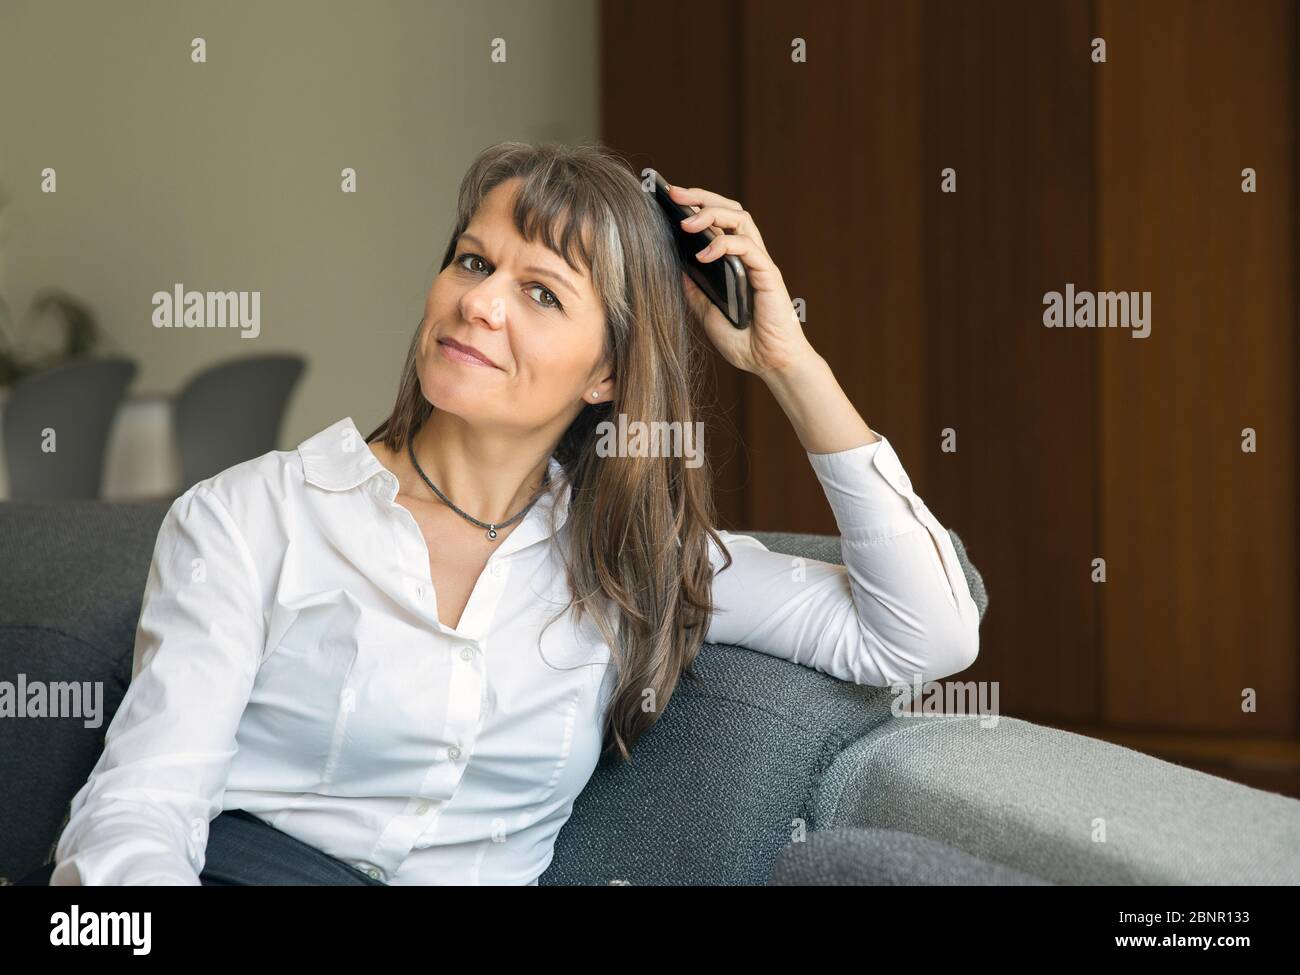 middle aged woman in formalware in her city apartment, holding a phone Stock Photo